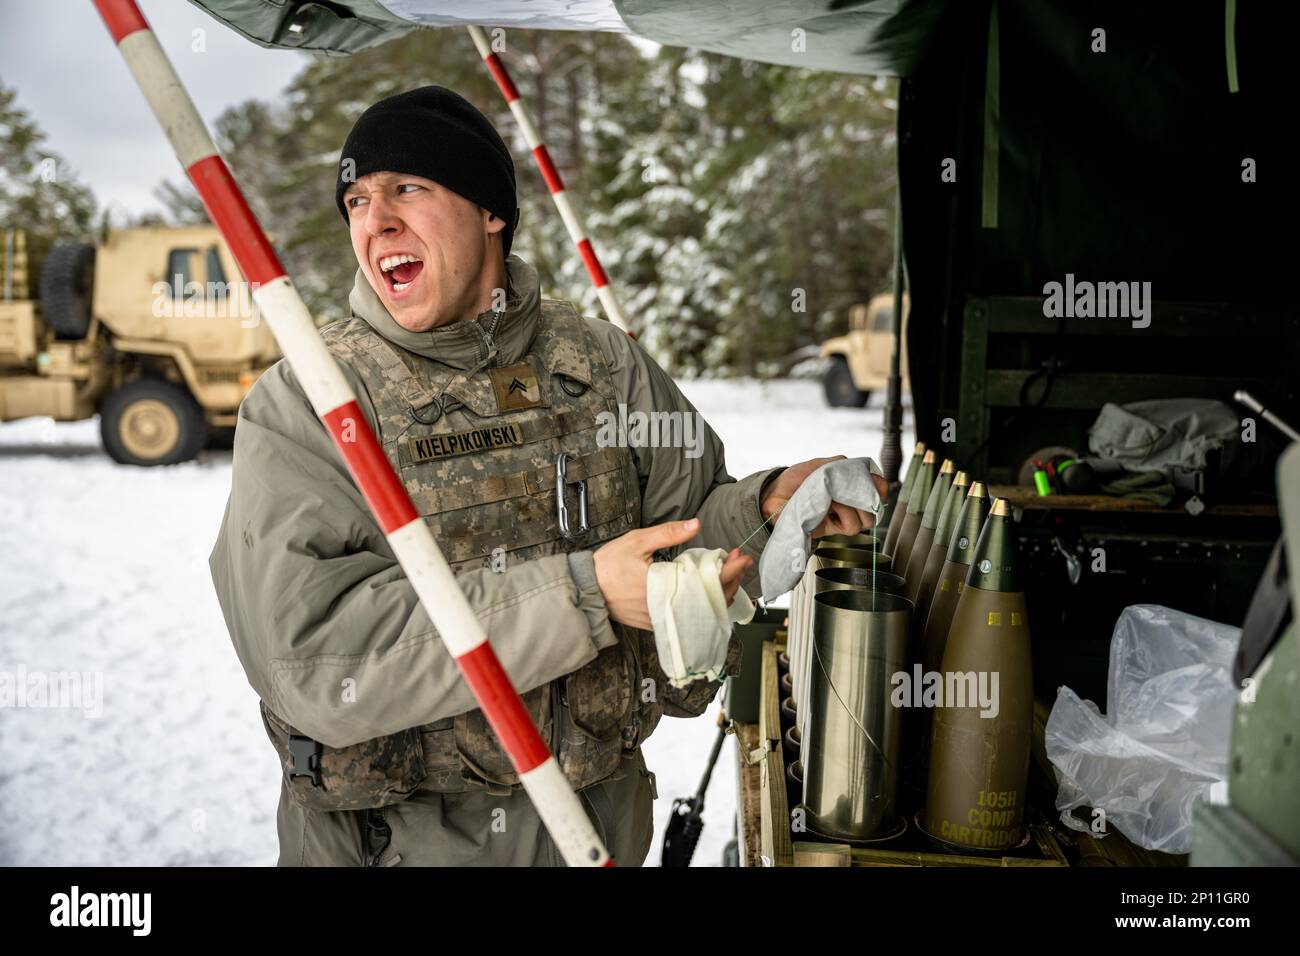 Army Cpl. Brady Kielpikowski, 1-120th Field Artillery Regiment, assembles a 105mm High Explosive shell to be used with the M119 howitzer during Northern Strike 23-1, Jan. 23, 2023, at Camp Grayling, Mich. Units that participate in Northern Strike’s winter iteration build readiness by conducting joint, cold-weather training designed to meet objectives of the Department of Defense’s Arctic Strategy. Stock Photo